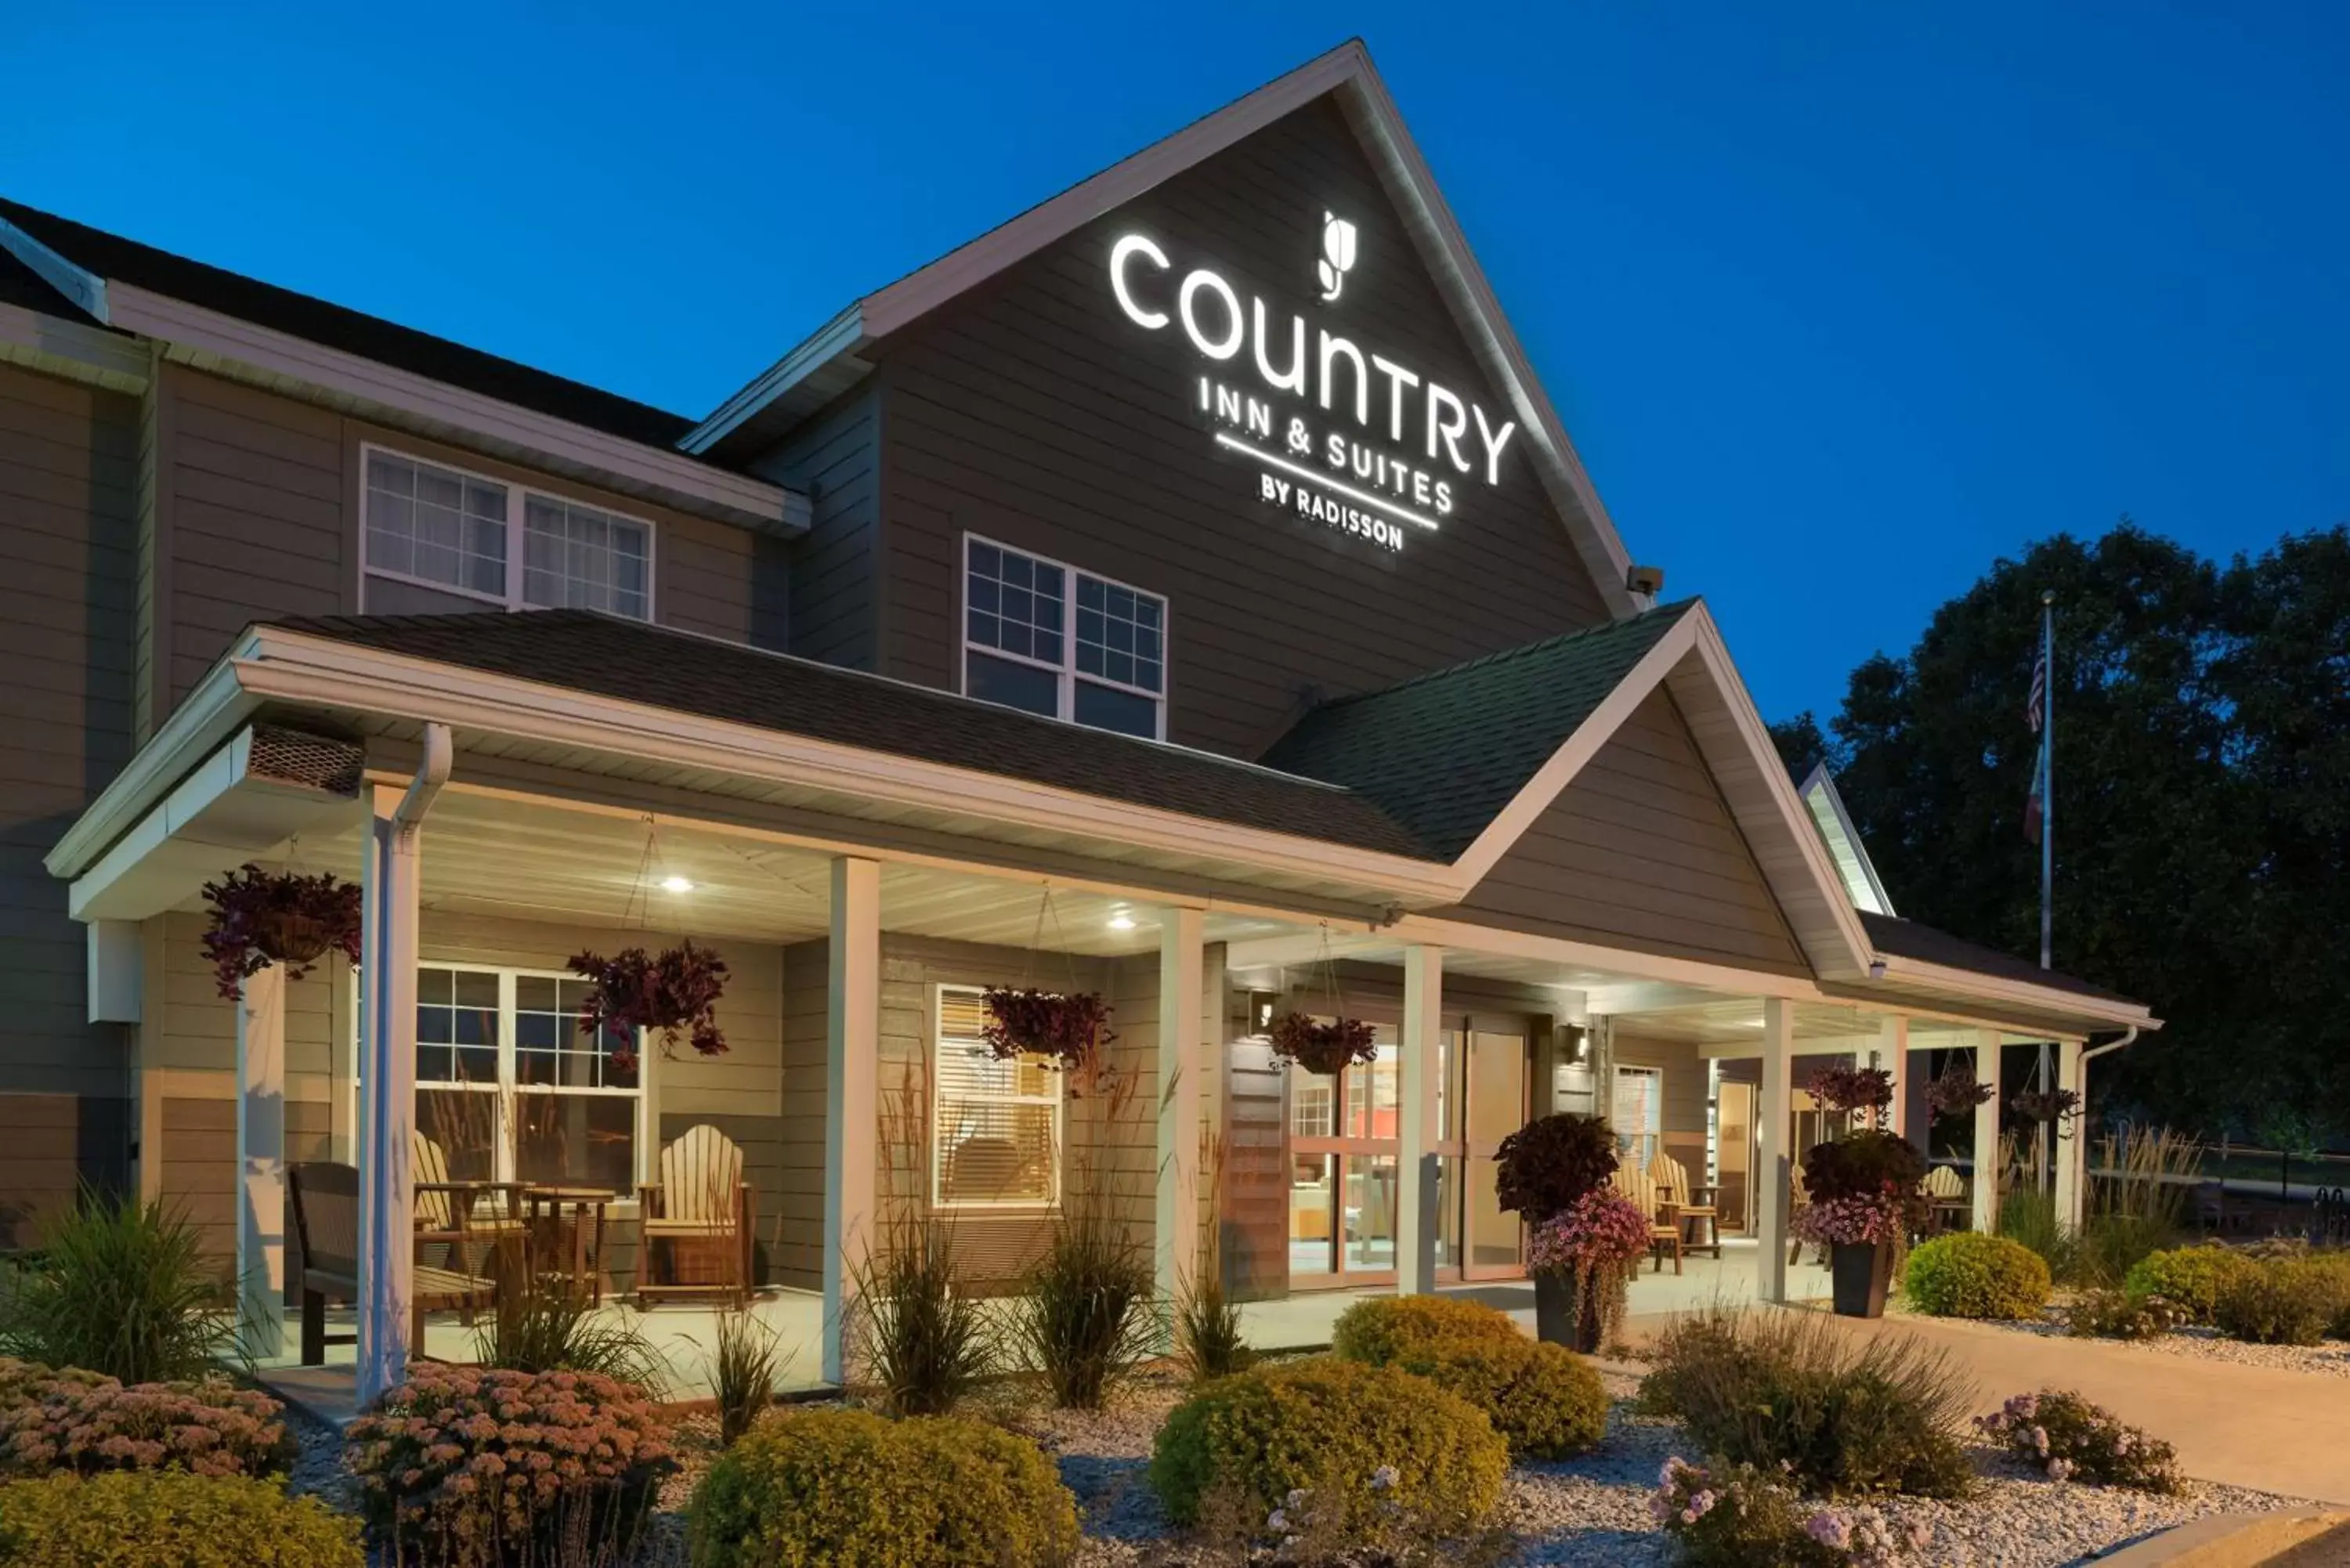 Property building in Country Inn & Suites by Radisson, Decorah, IA